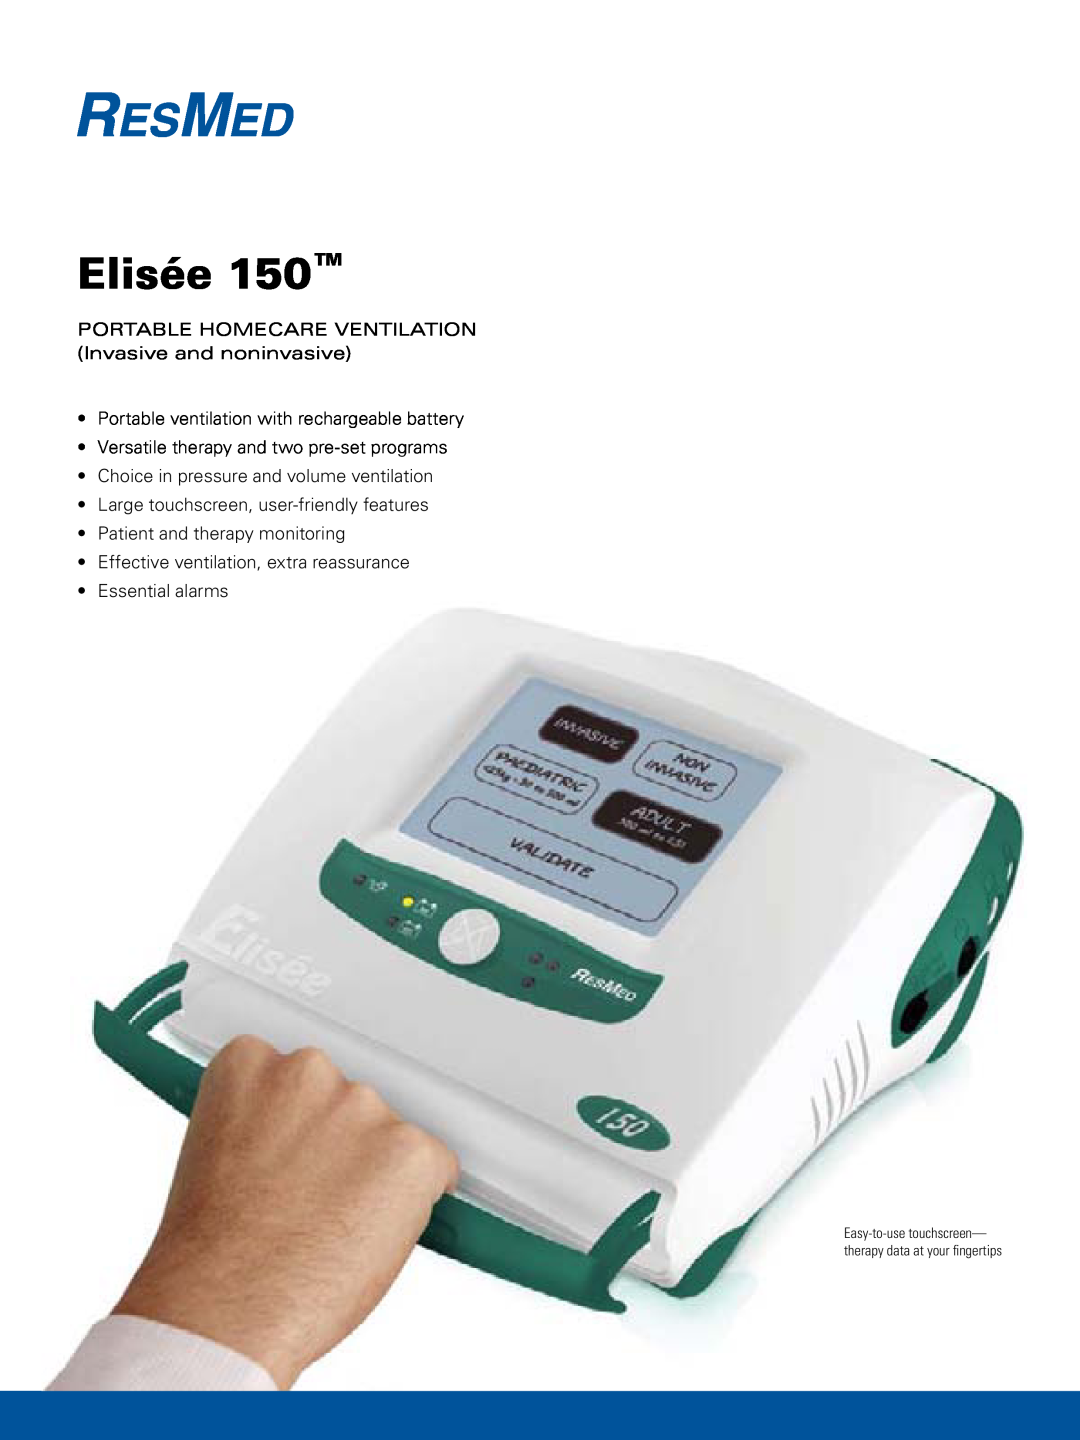 ResMed 150 manual Elisée, Portable ventilation with rechargeable battery, Versatile therapy and two pre-setprograms 